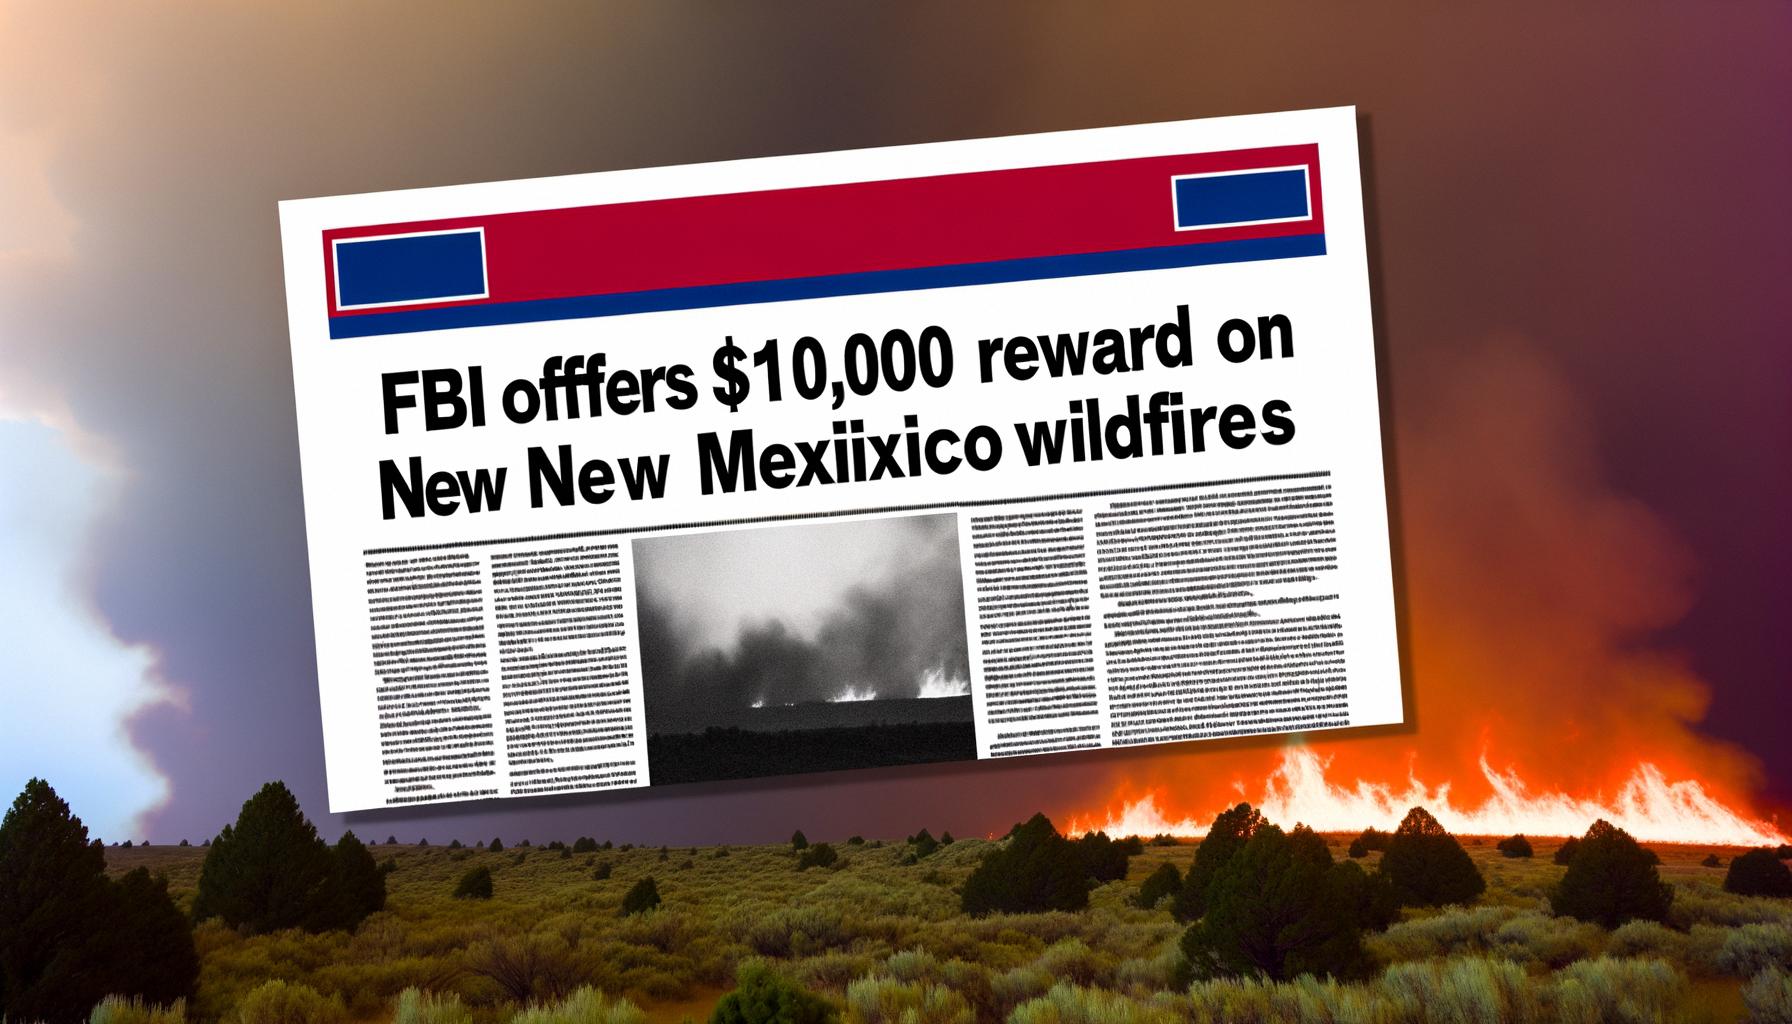 FBI offers $10,000 reward for information on New Mexico wildfires